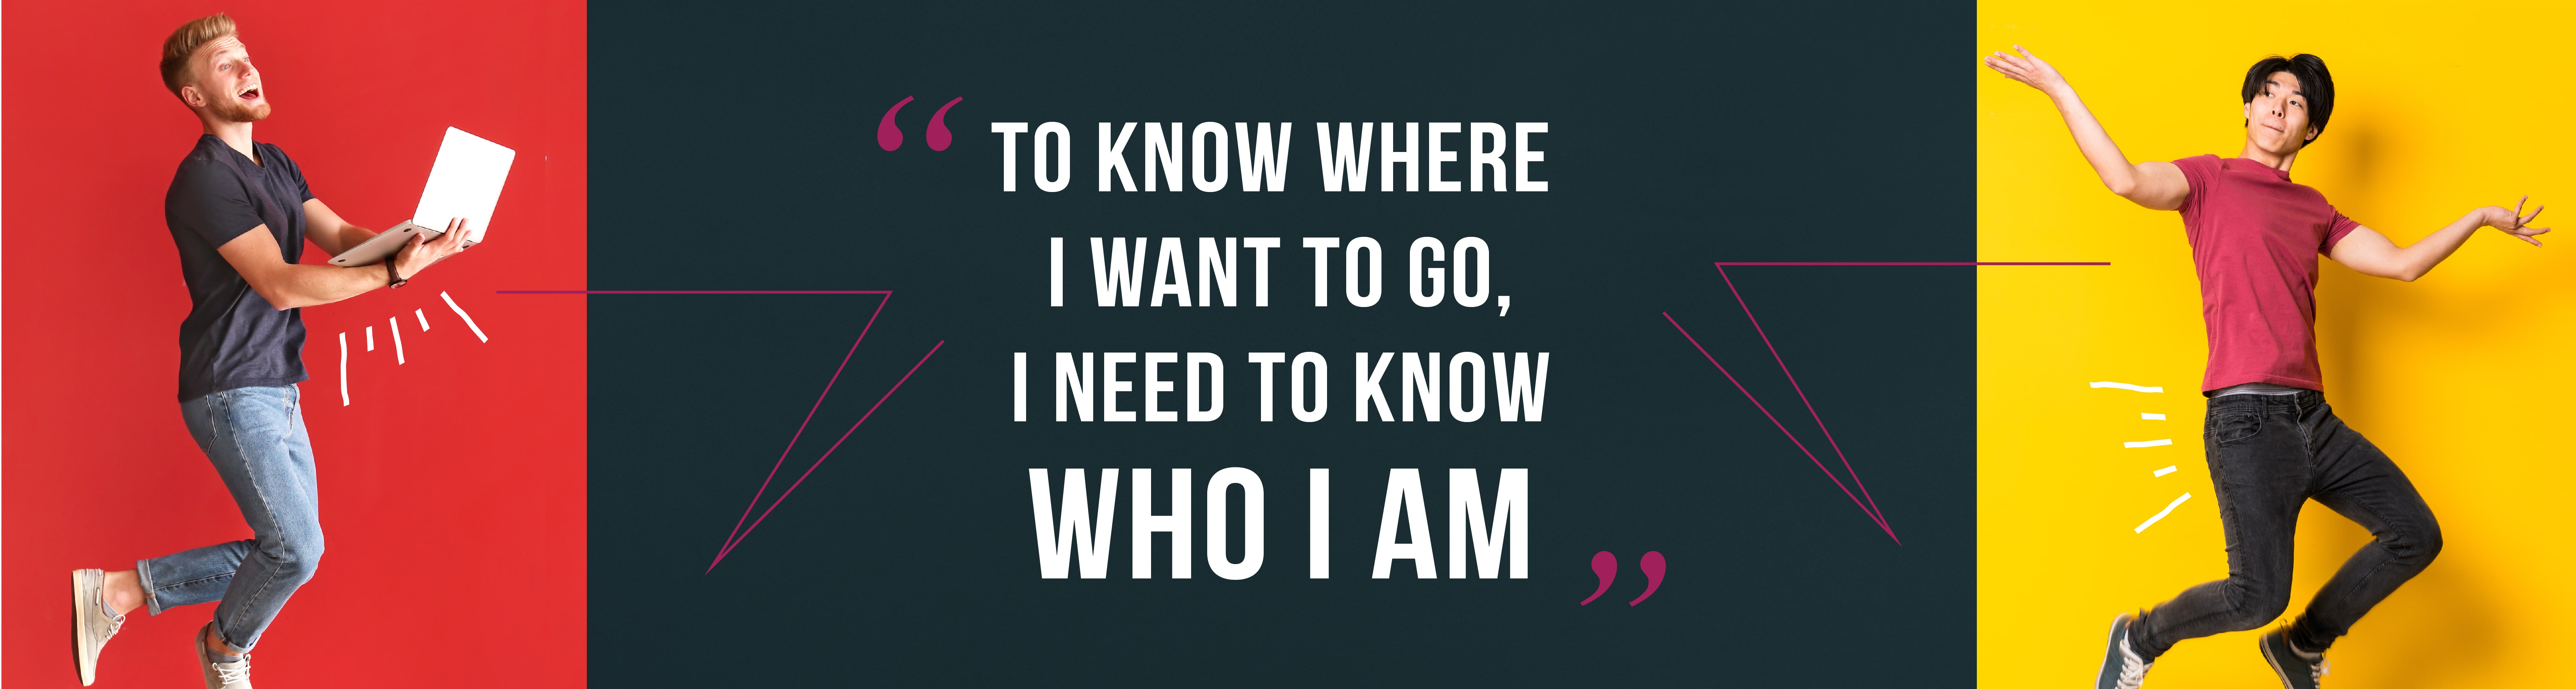 To know where I want to go, I need to know who I am